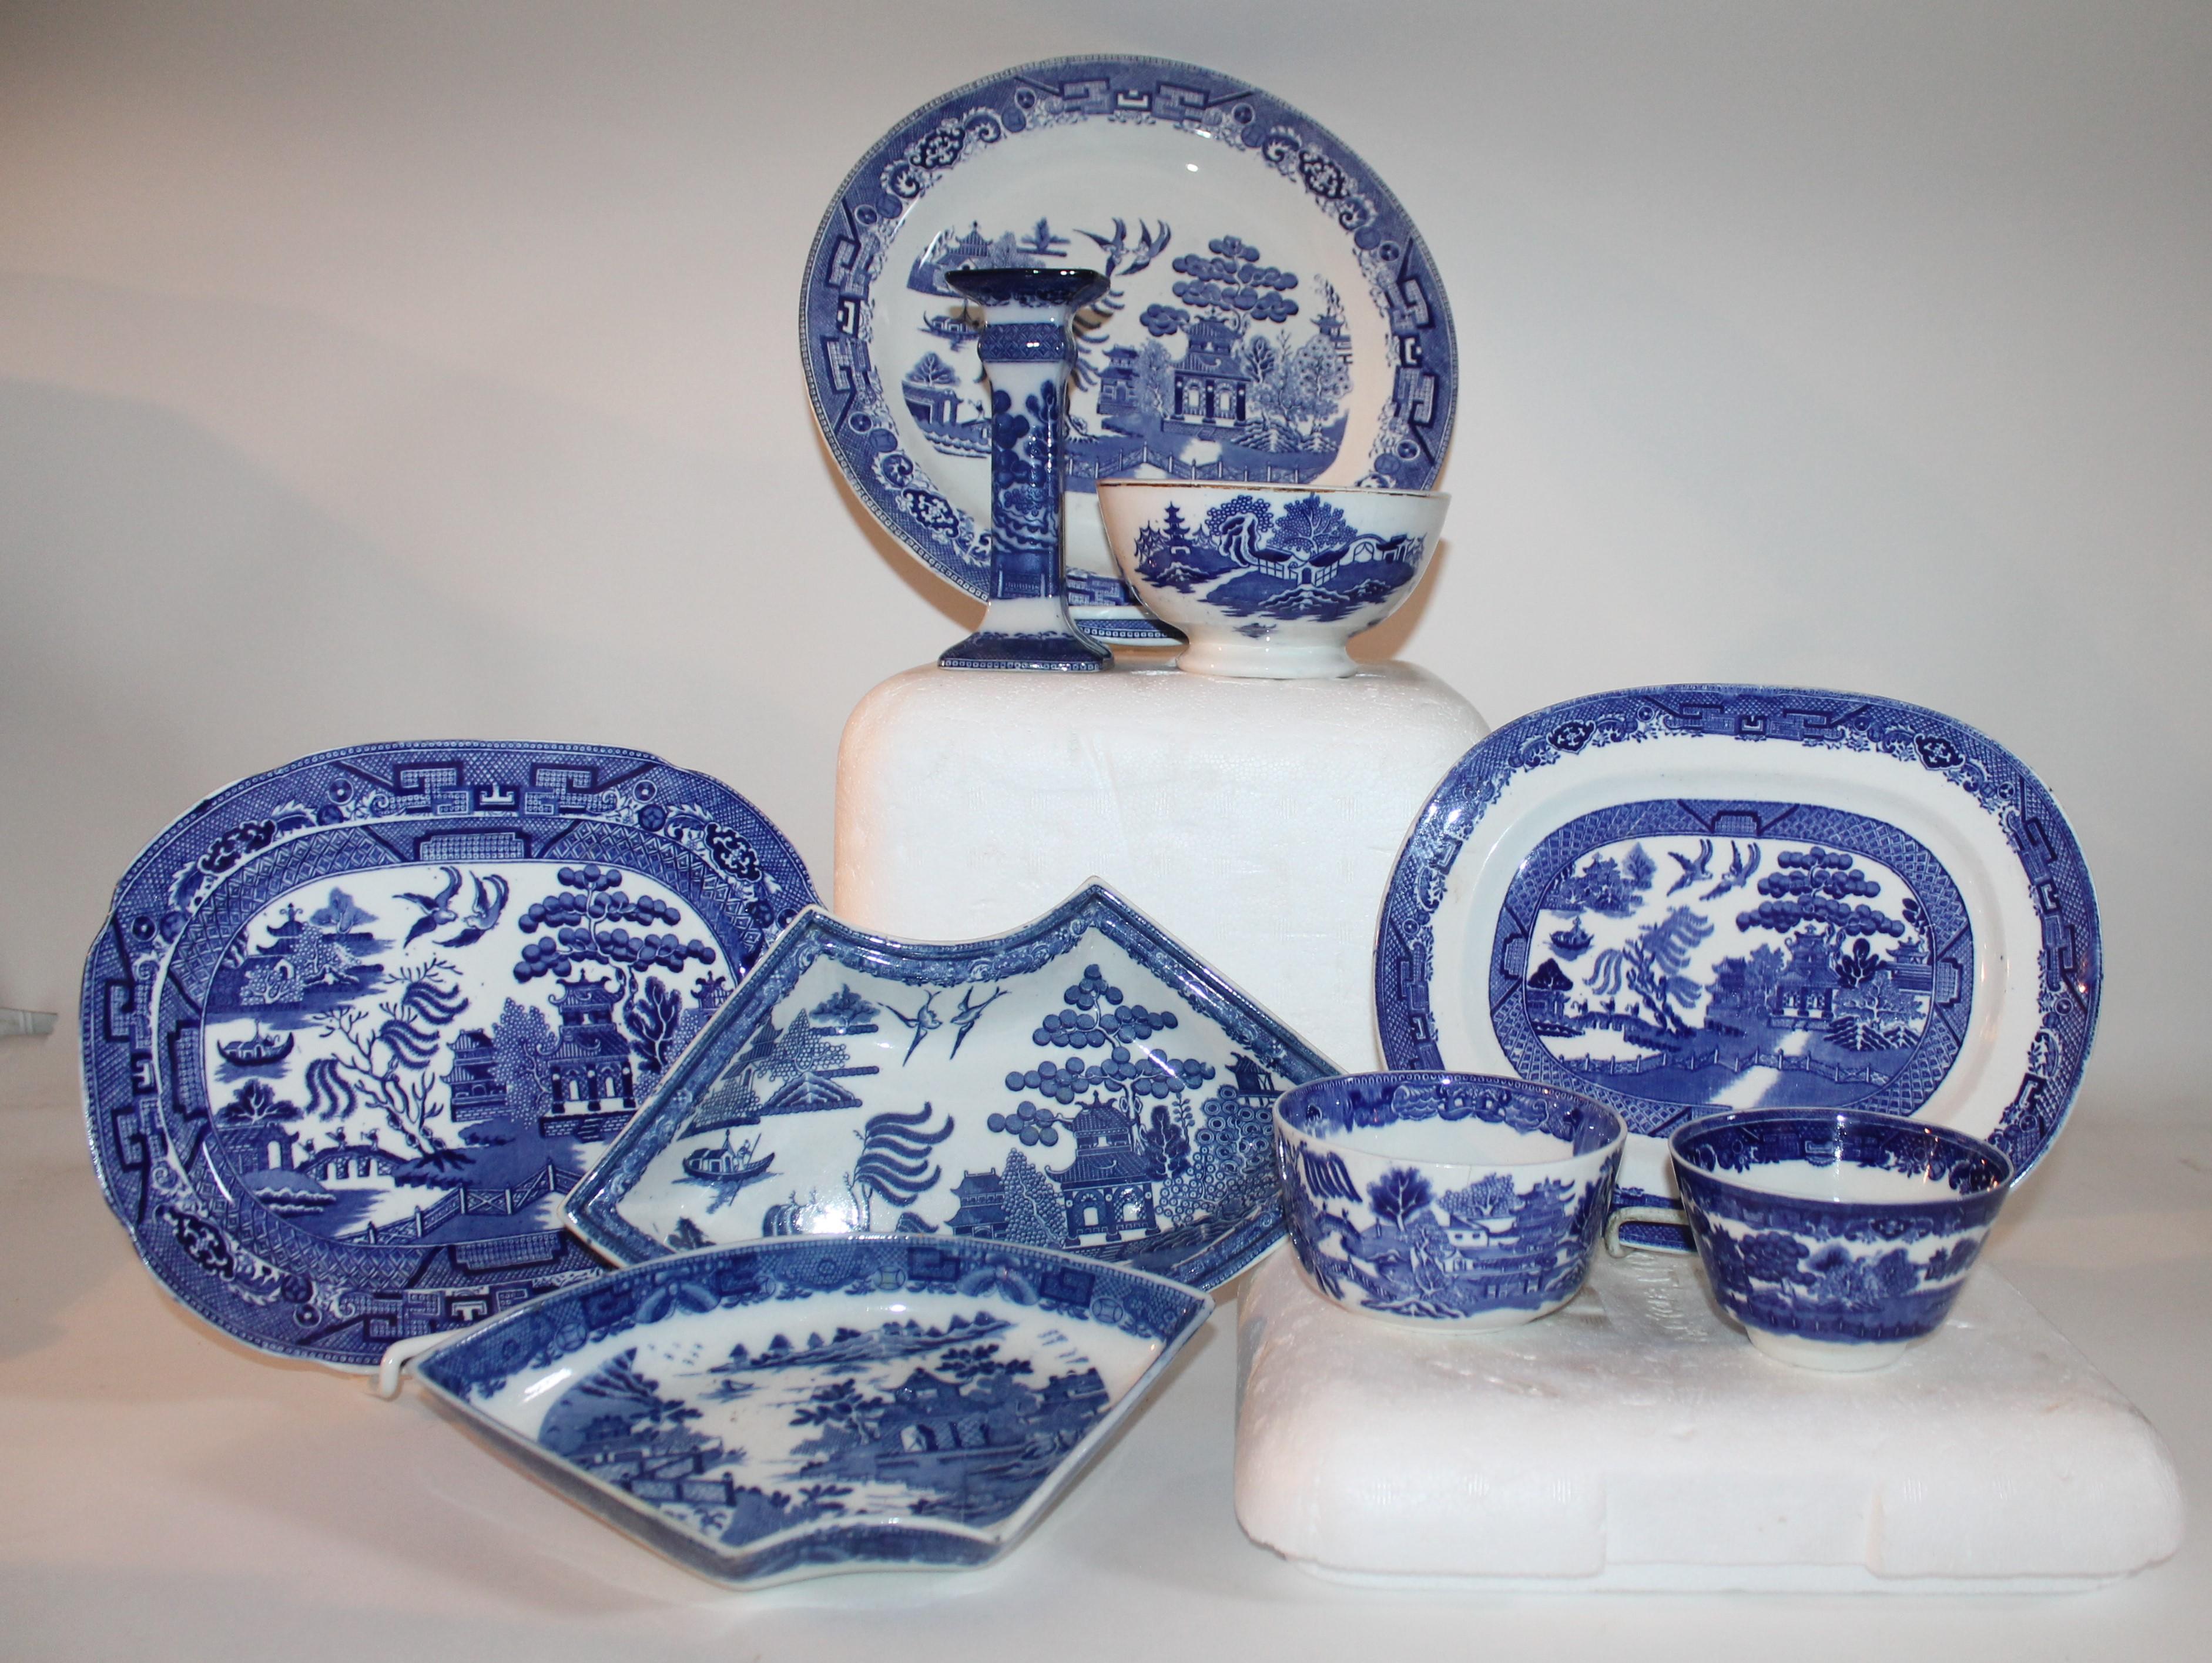 This collection of various blue willow dishes are all in good condition and are all English made pieces. Sold as a group.

Measures: Smaller platter 10 x 8 x 1
Larger platter 11 x 9 x 1
candle holder 3 x 3 x 11
Dish 12.5 x 1
rice bowl large 6